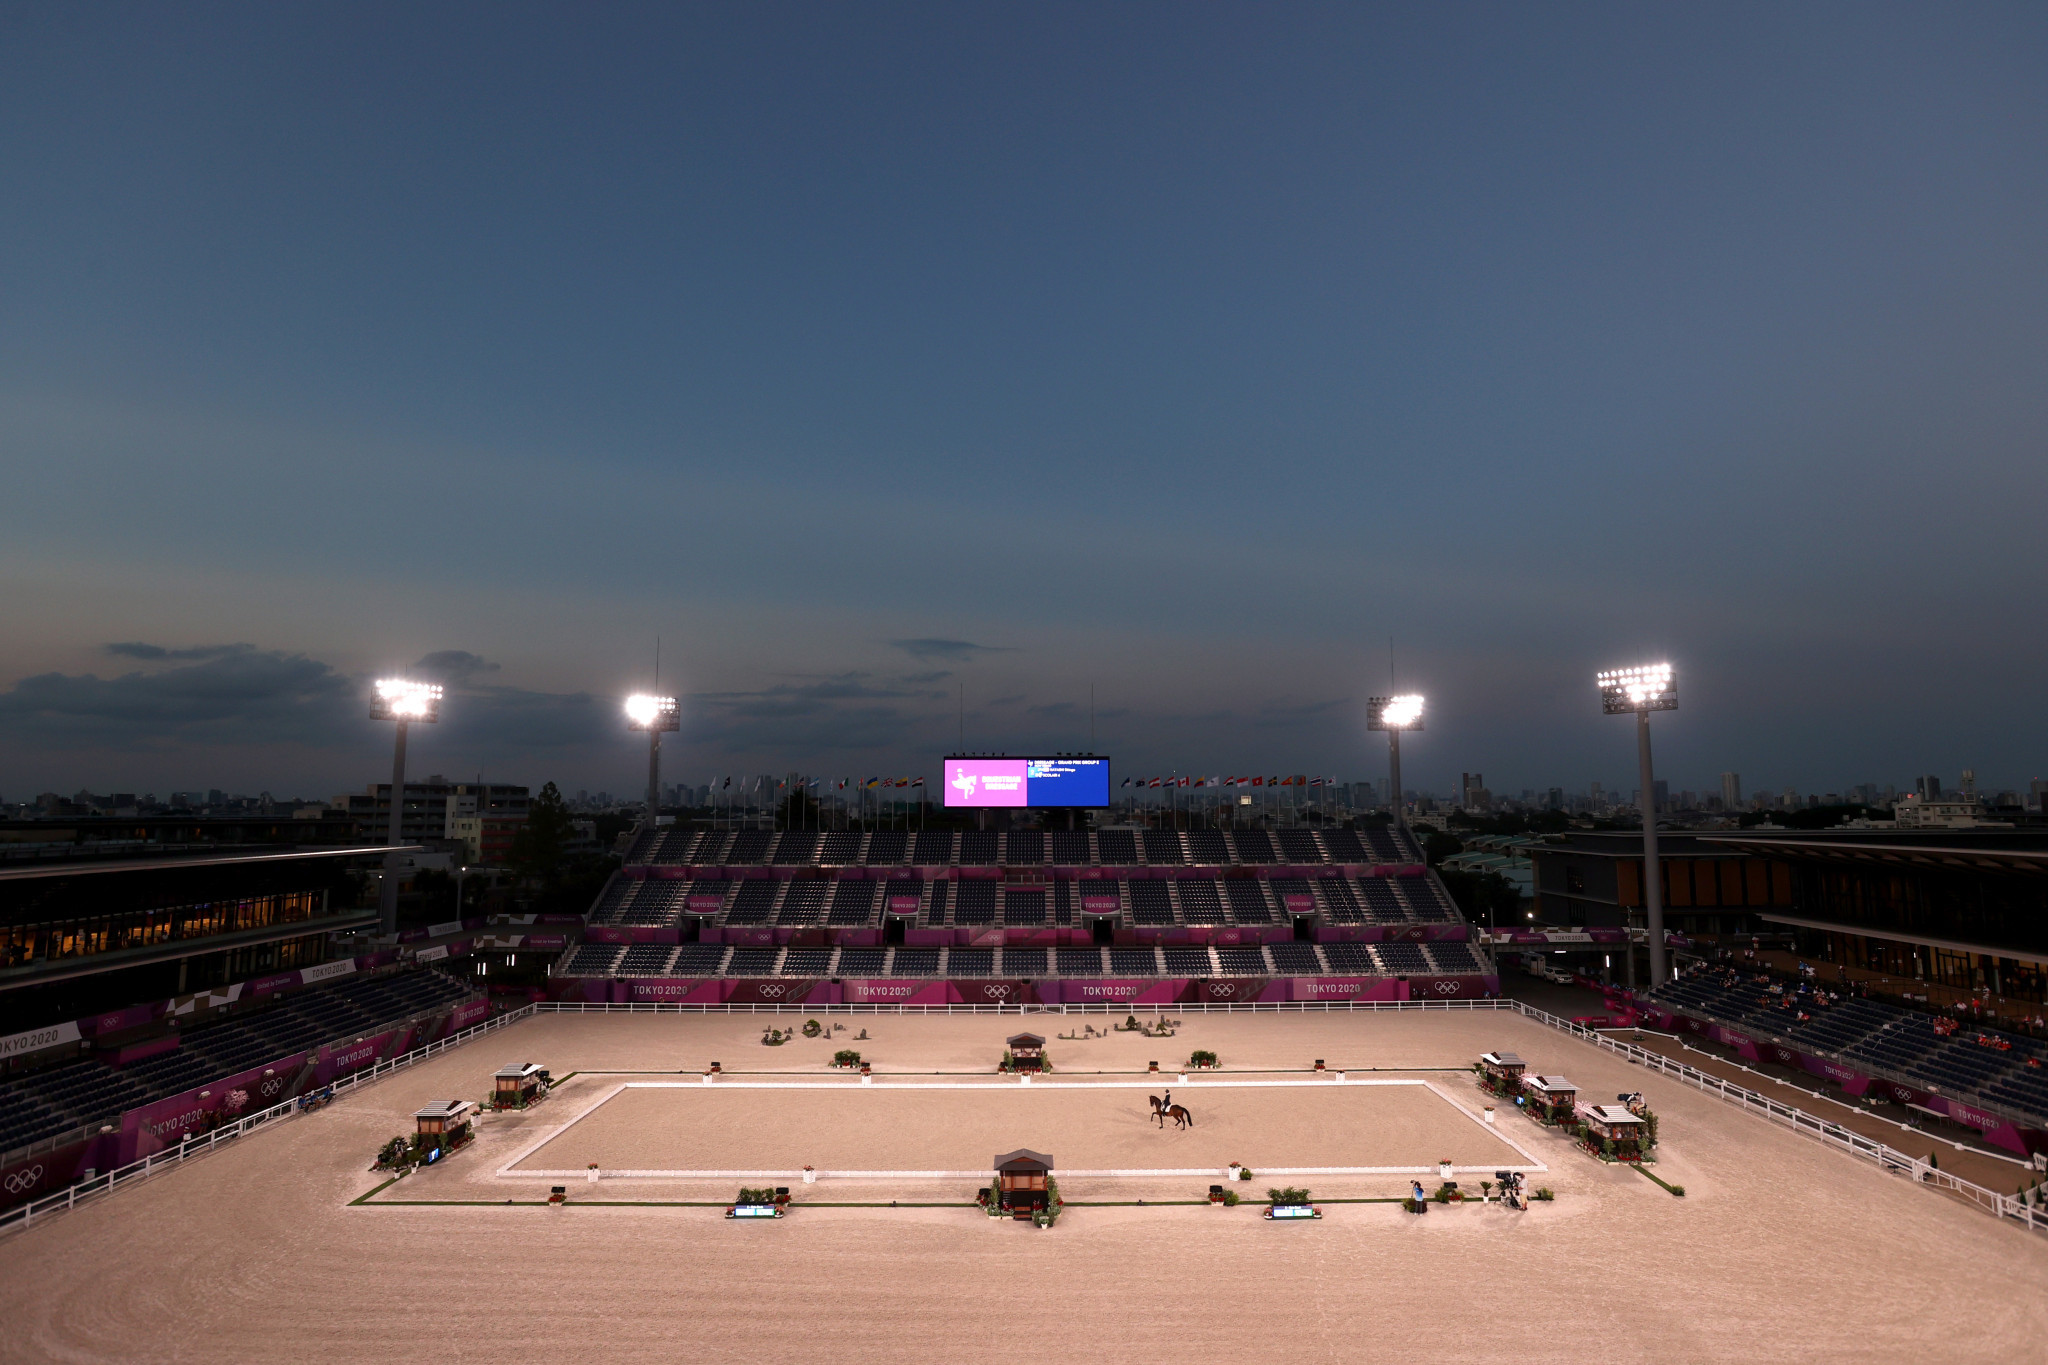 The Baji Koen in Tokyo is set to host equestrian events at the Aichi-Nagoya 2026 Asian Games ©Getty Images